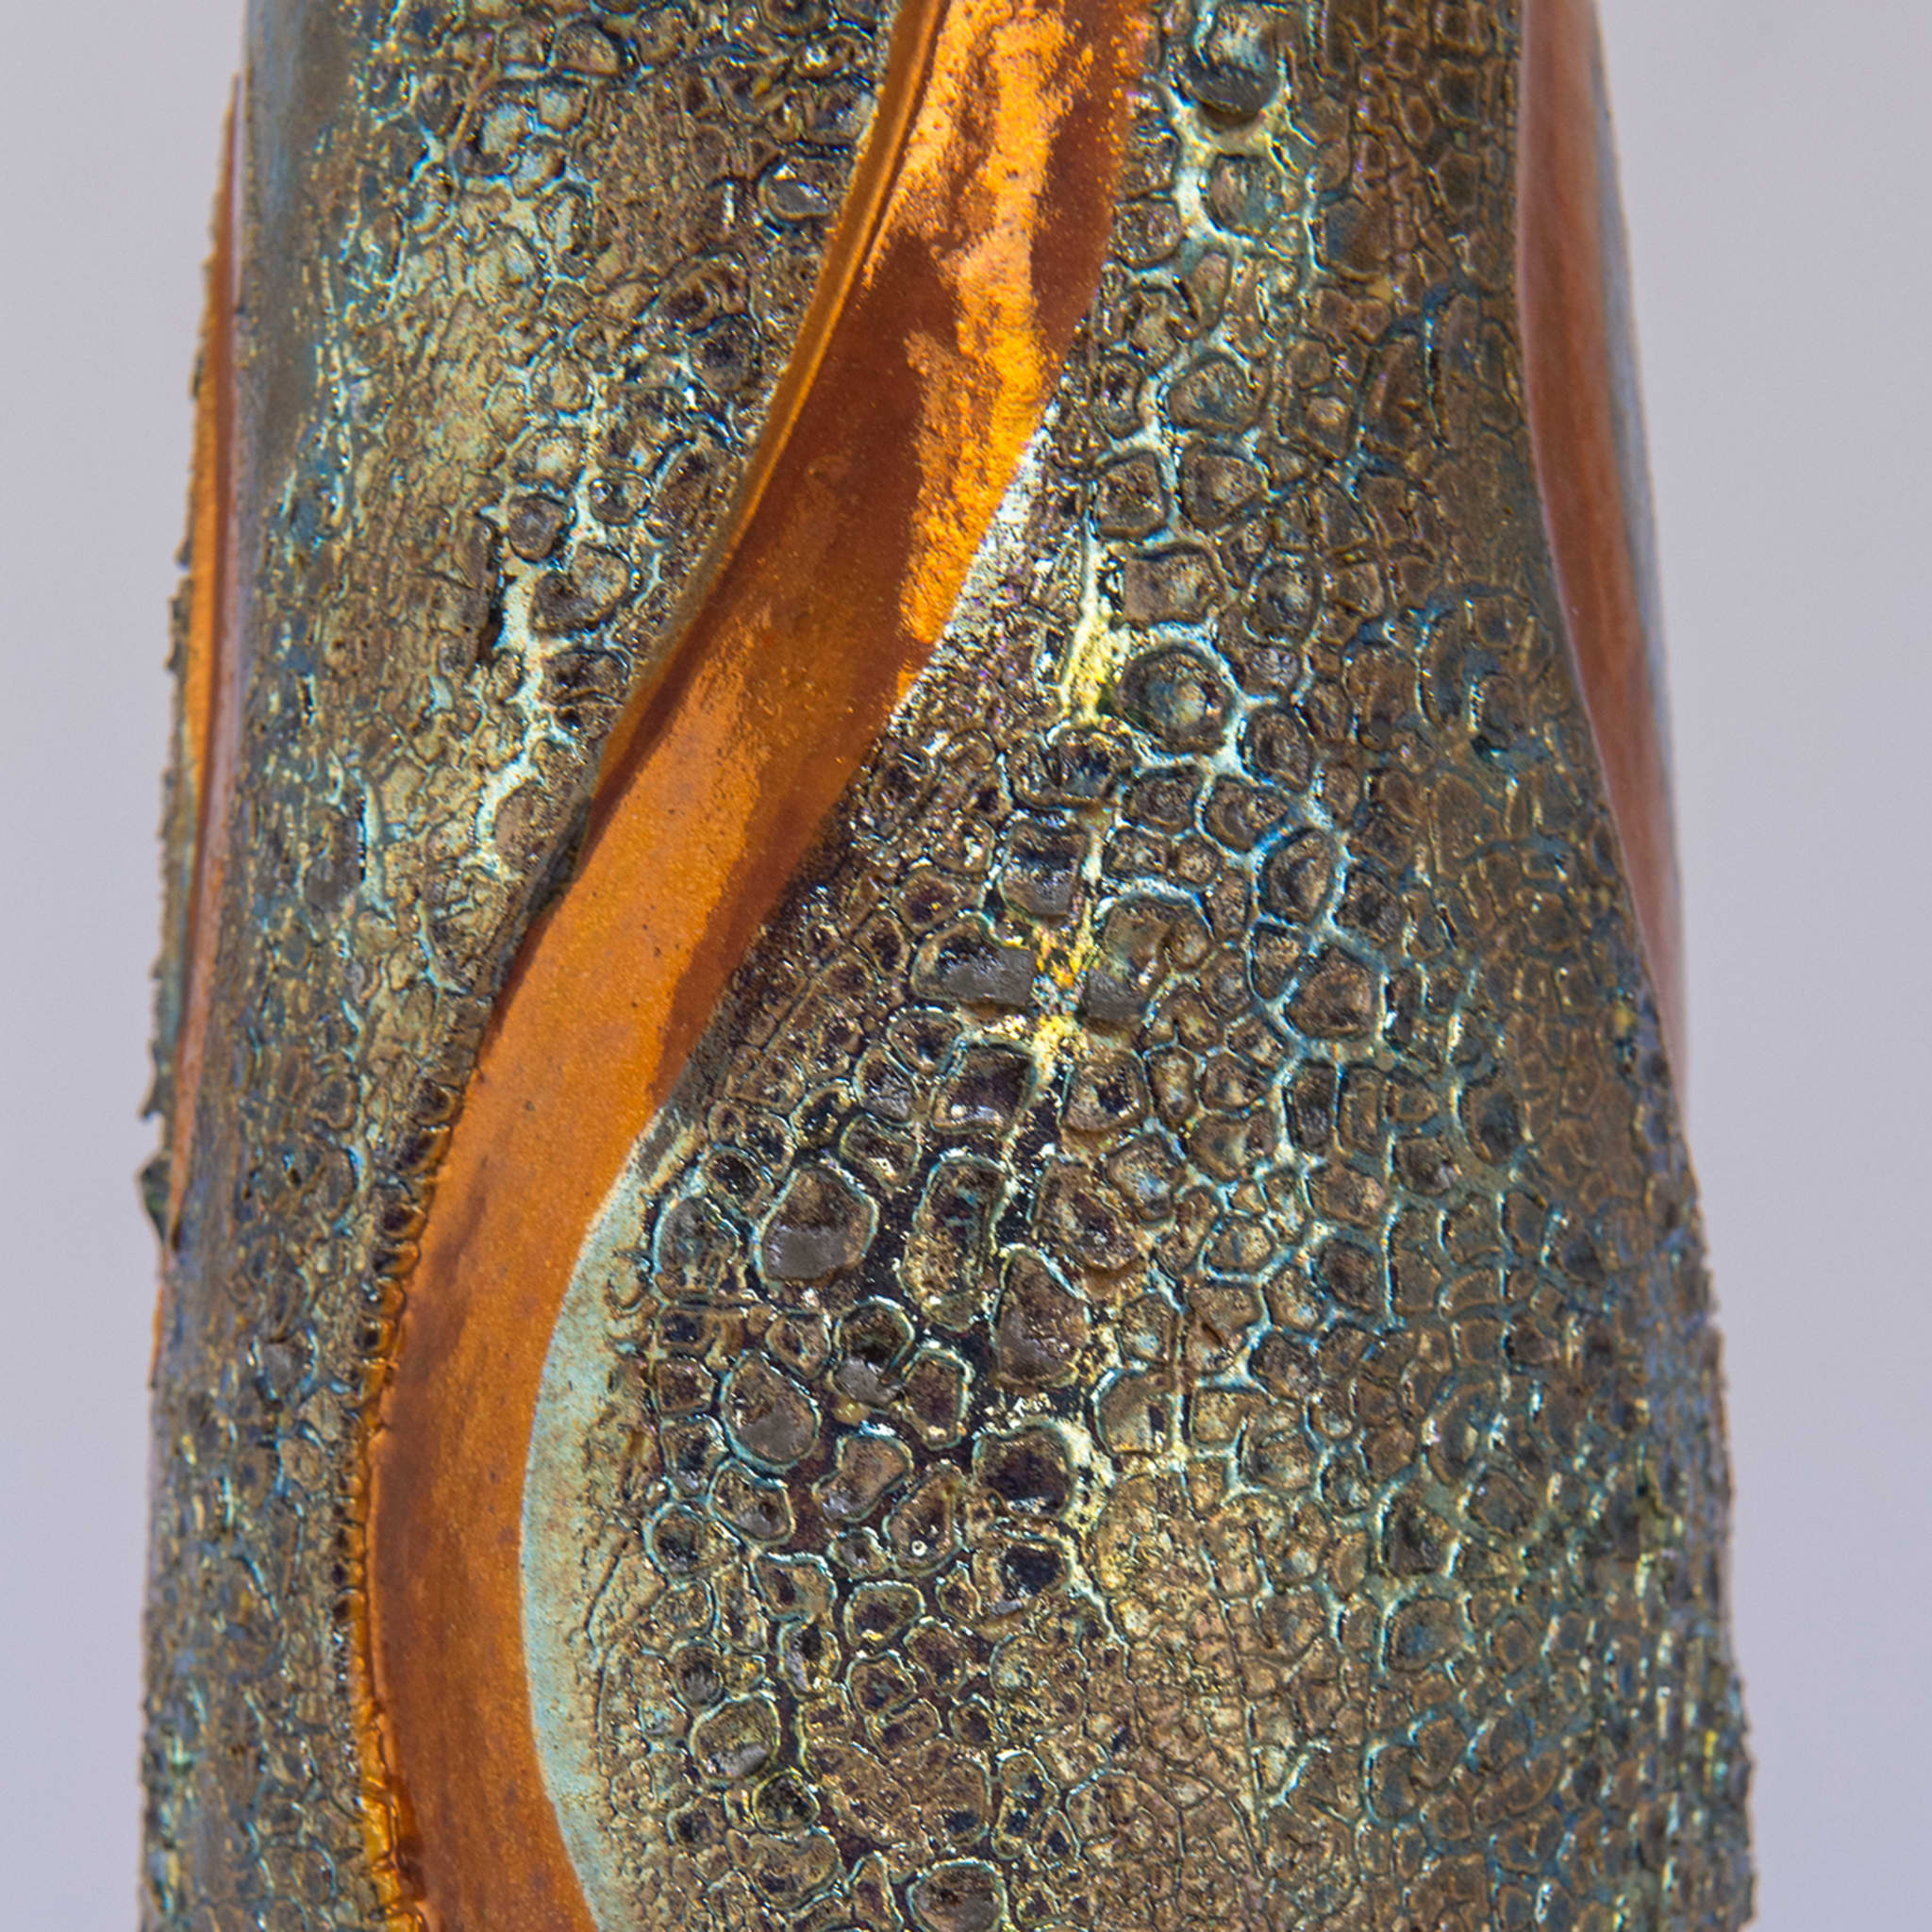 Copper and Silver Lustre with Crust Vase - Alternative view 3